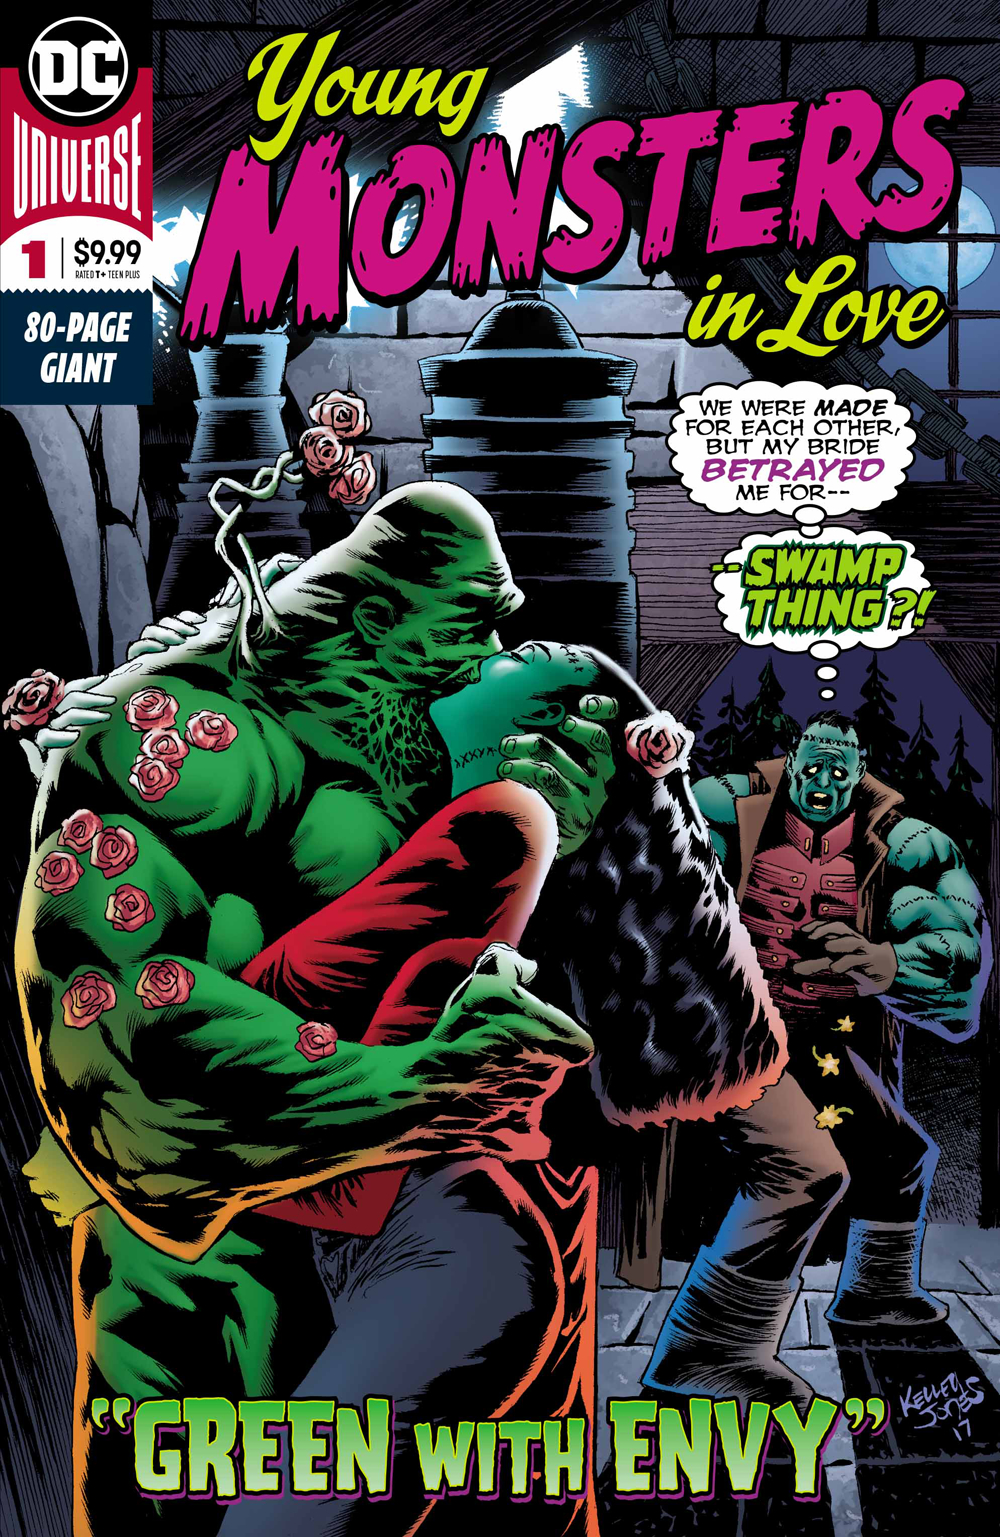 YOUNG MONSTERS IN LOVE #1